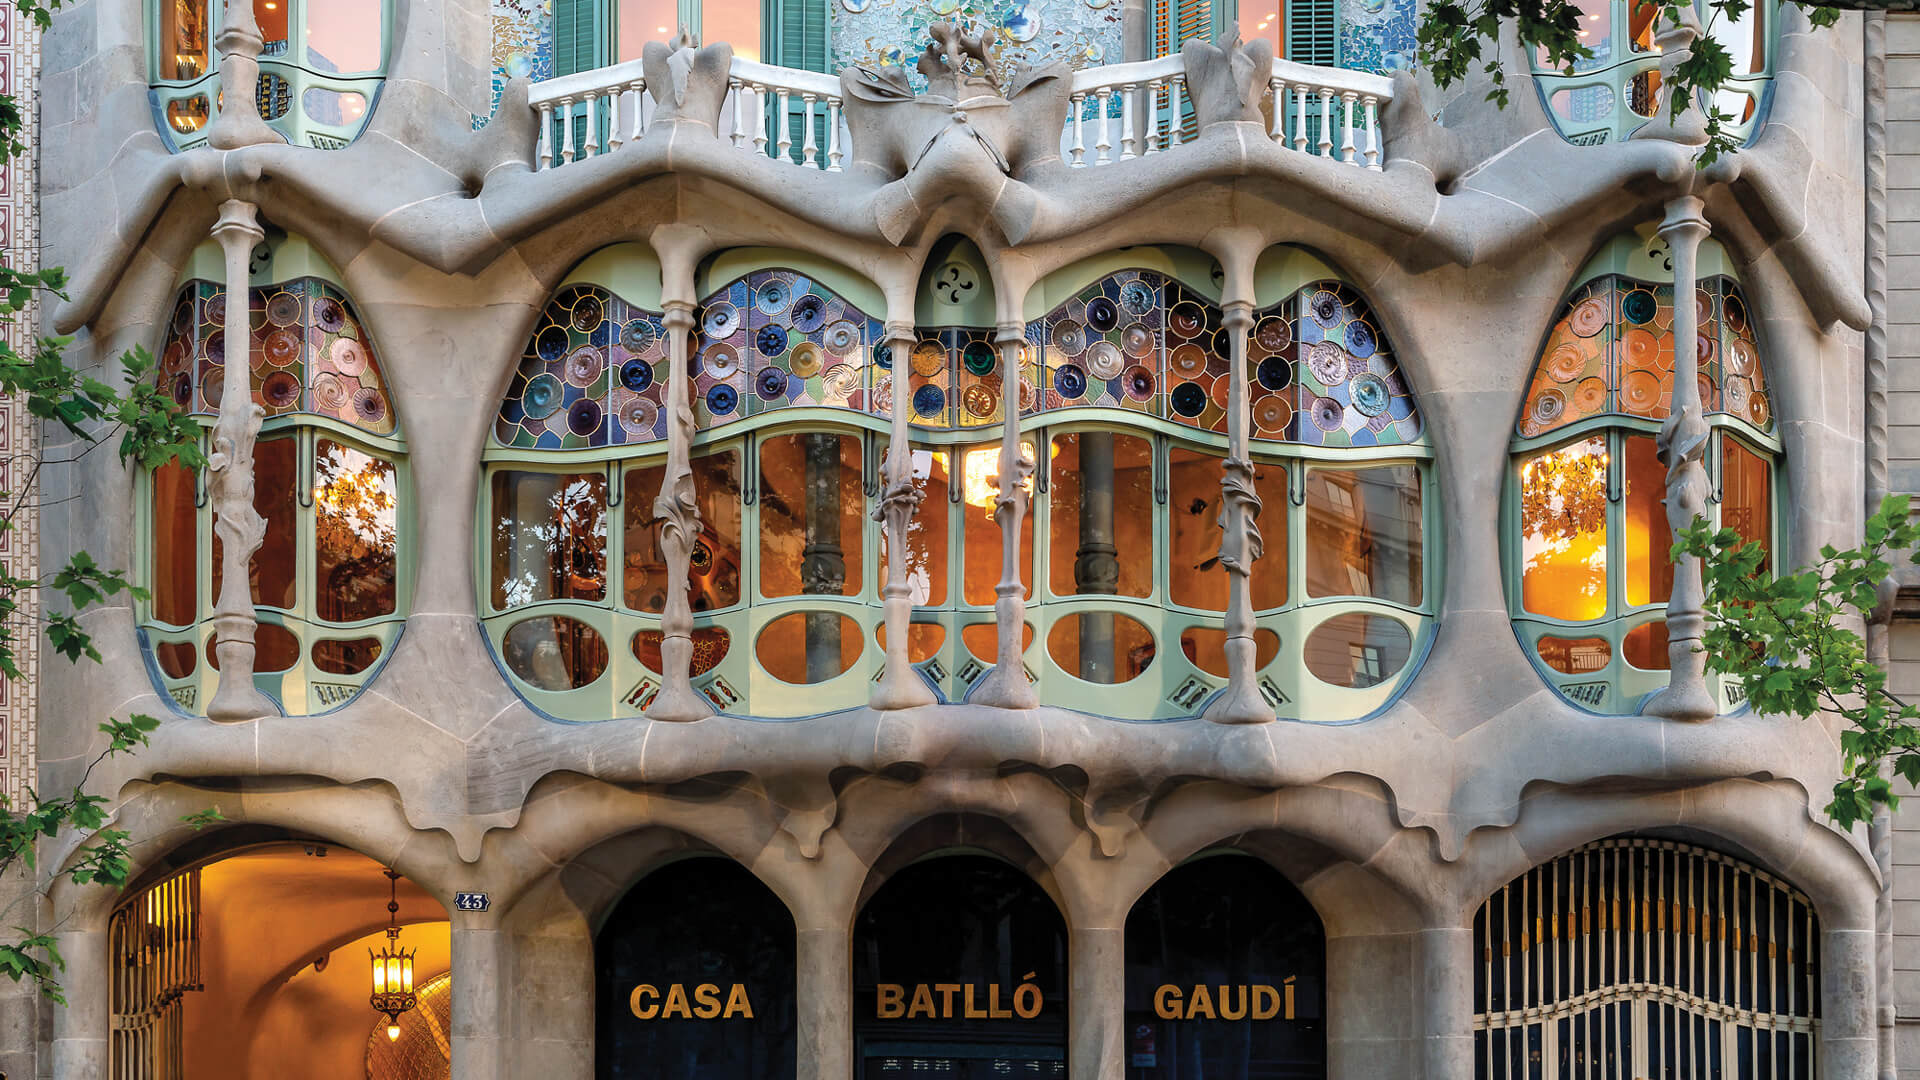 A close up shot of front portion of Casa Batllo building in Barcelona, Spain